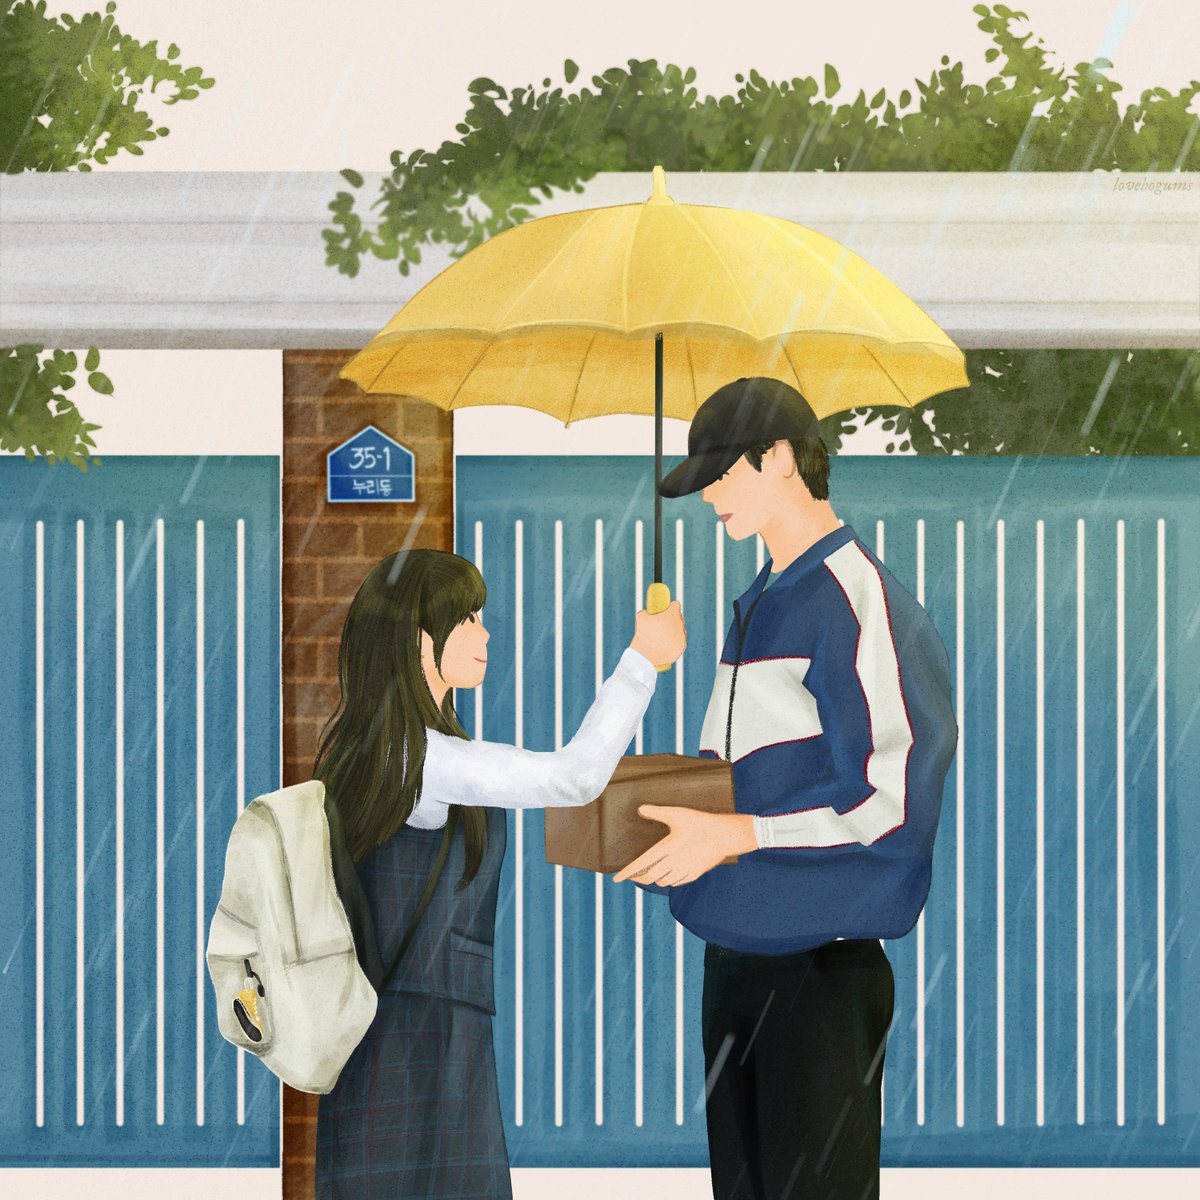 i used to hate the rain. it rained when i saw you for the first time. i liked it that day. i didn't think i could suddenly like something i hated my whole life. #lovelyrunner #선재업고튀어 #kimhyeyoon #김혜윤 #byeonwooseok #변우석